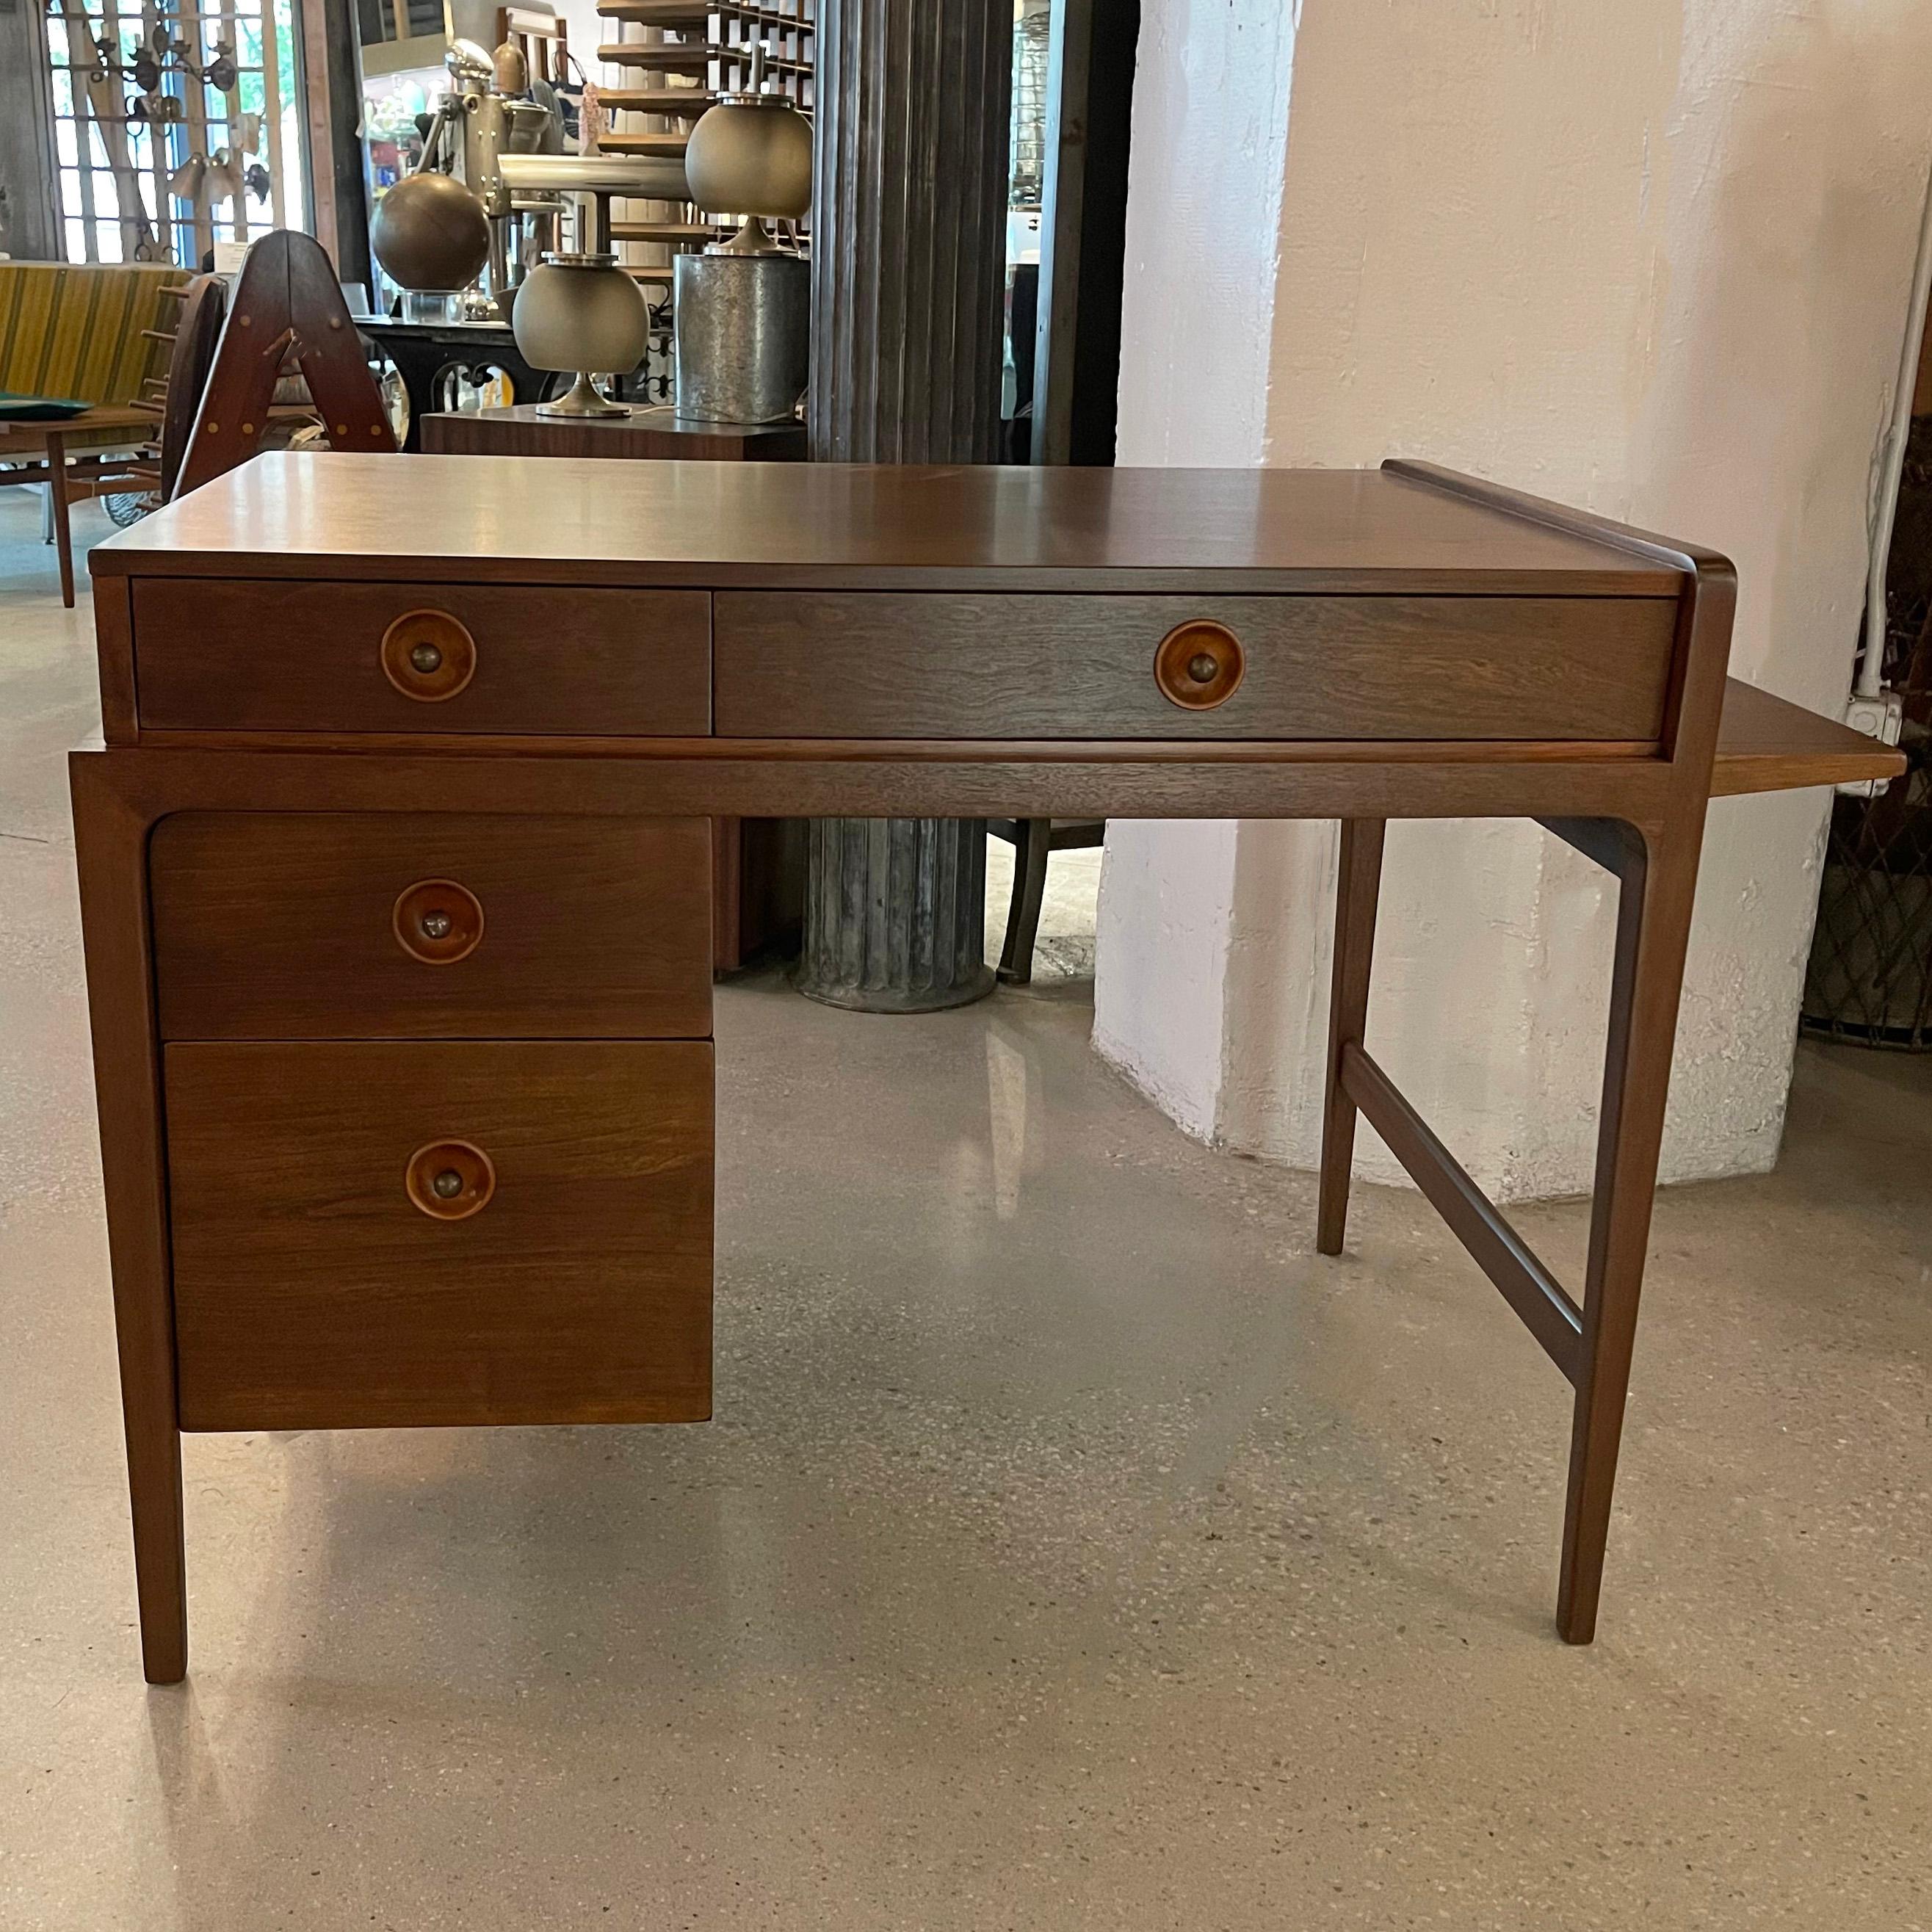 Wonderfully detailed, Mid-Century Modern, walnut desk by John Van Koert for Drexel Counterpoint features 4 drawers with recessed pulls and a 6 inch side ledge that extends out to 22 inches. The desk is finished on the back as well. The chair